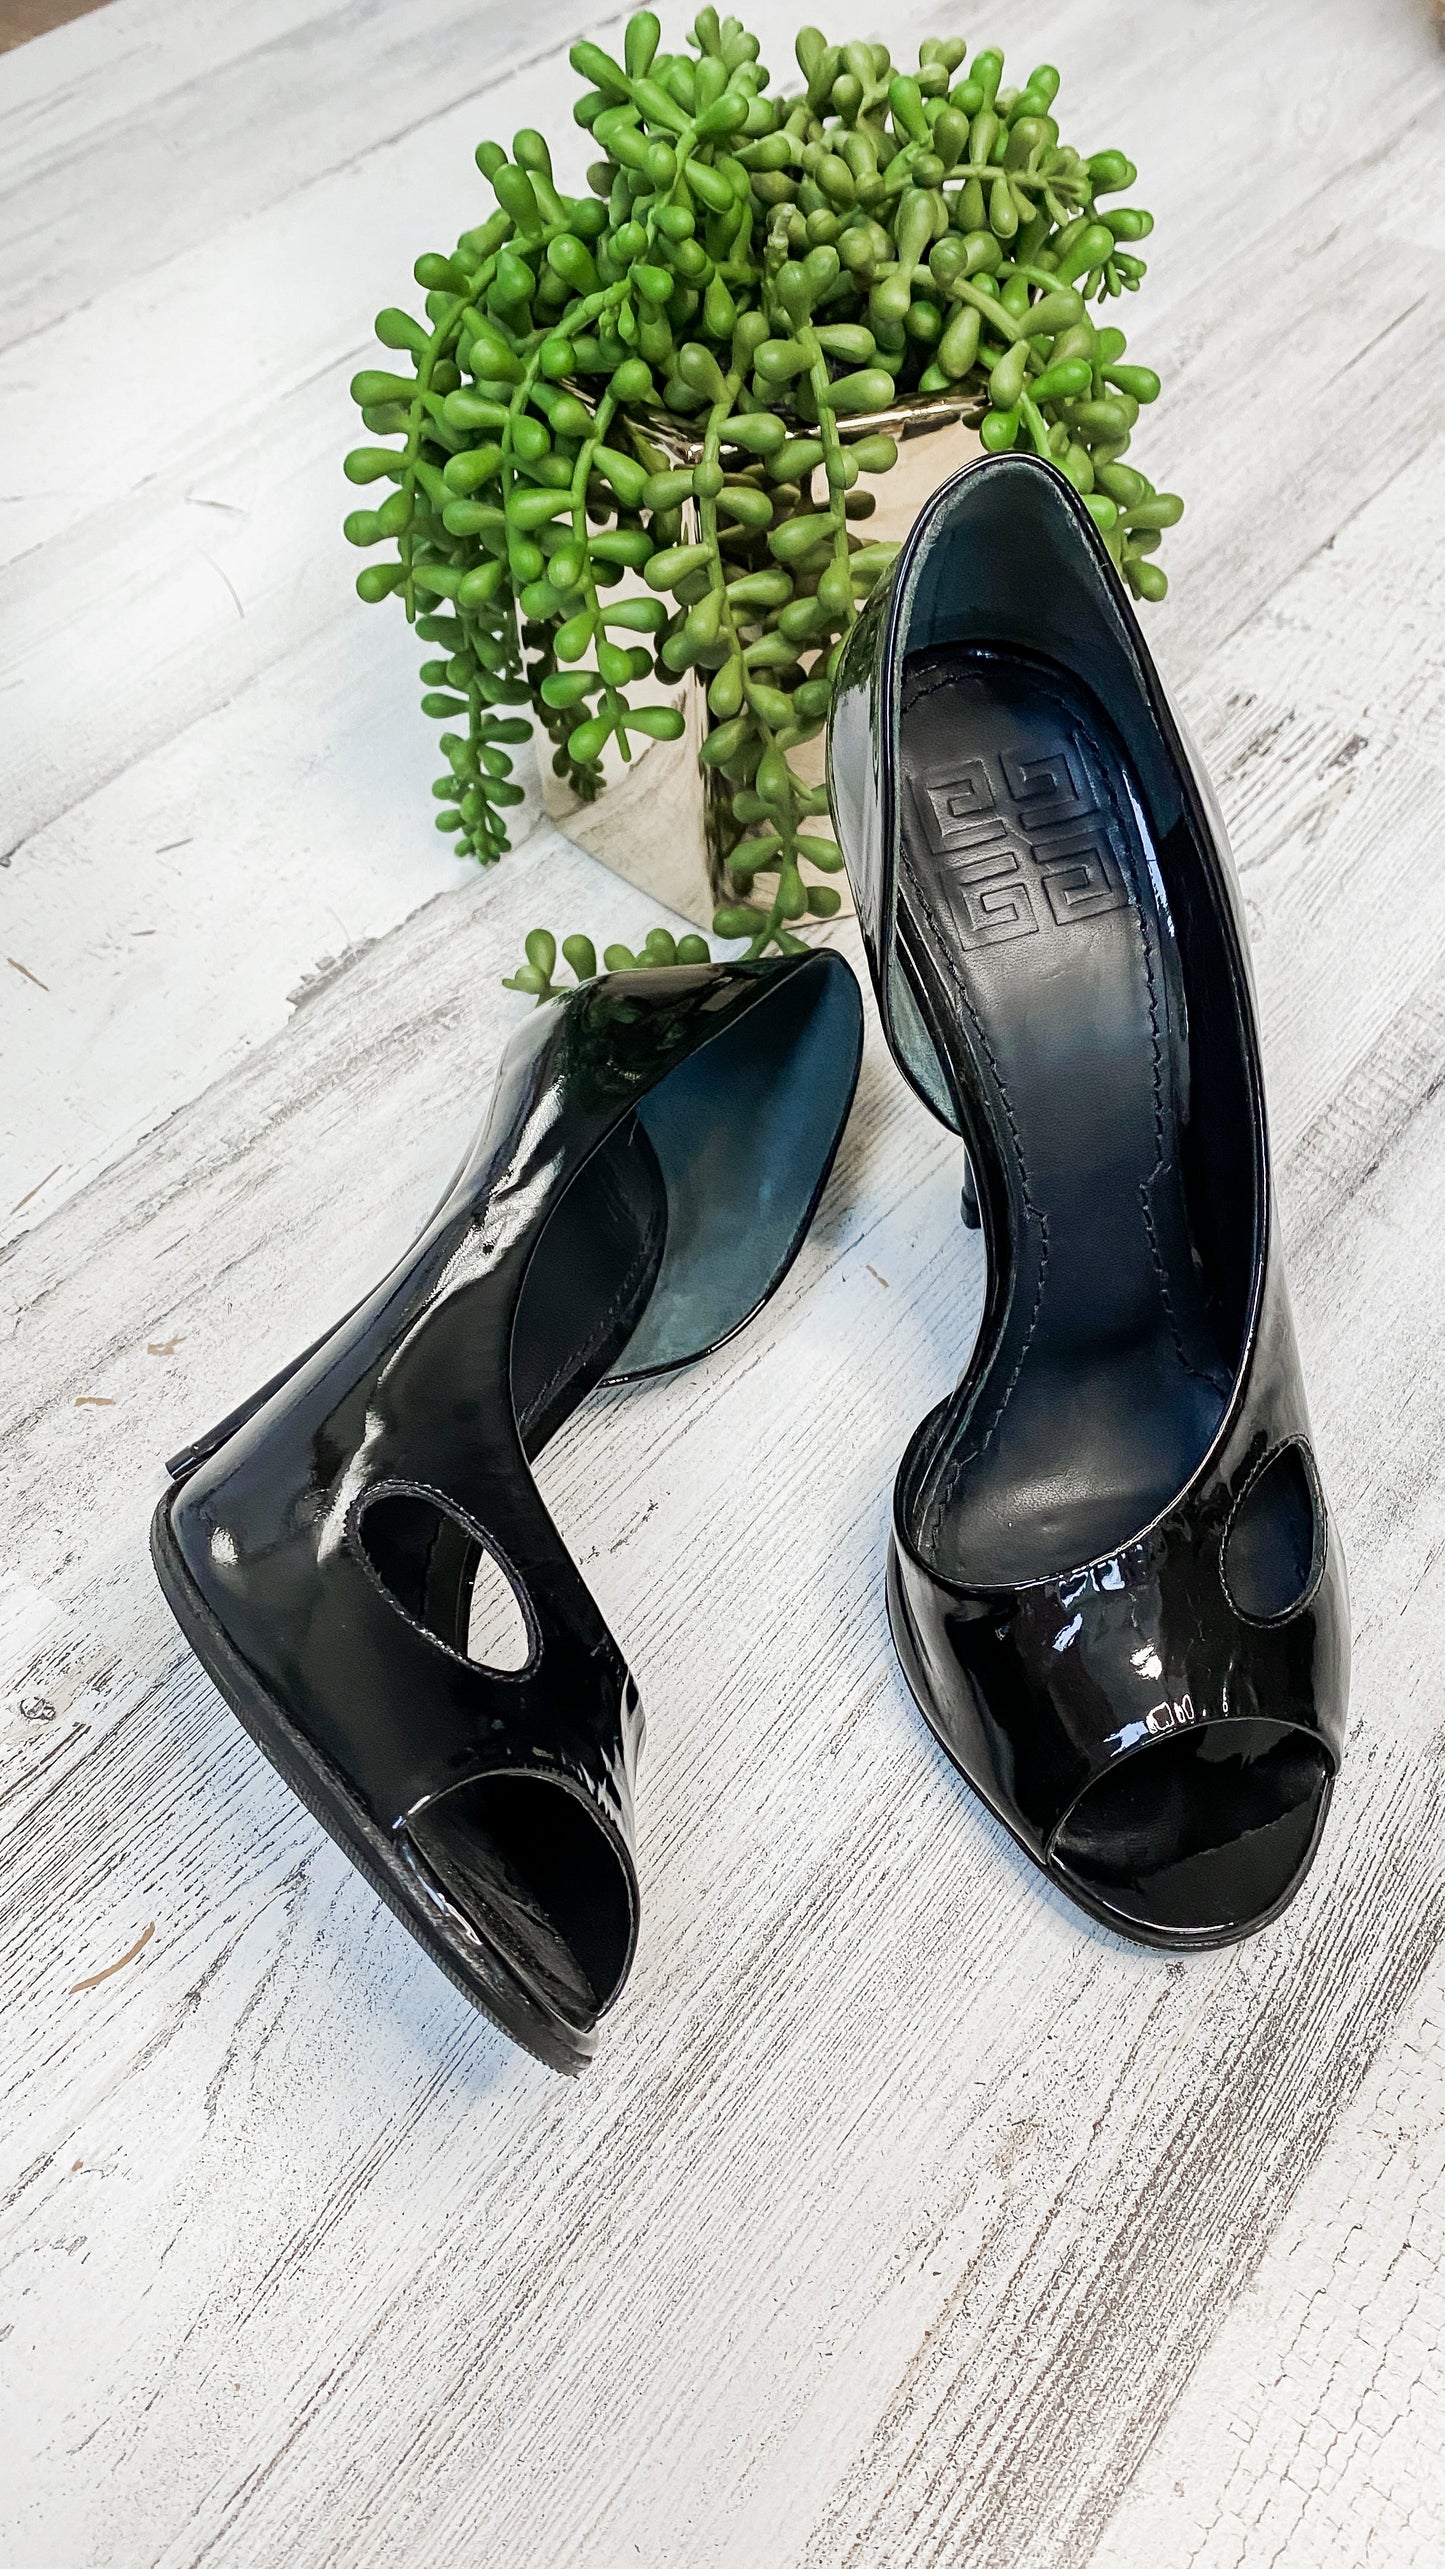 Givenchy Black Patent Leather D’Orsay Peep Toe Cut Out Heels (38/8)